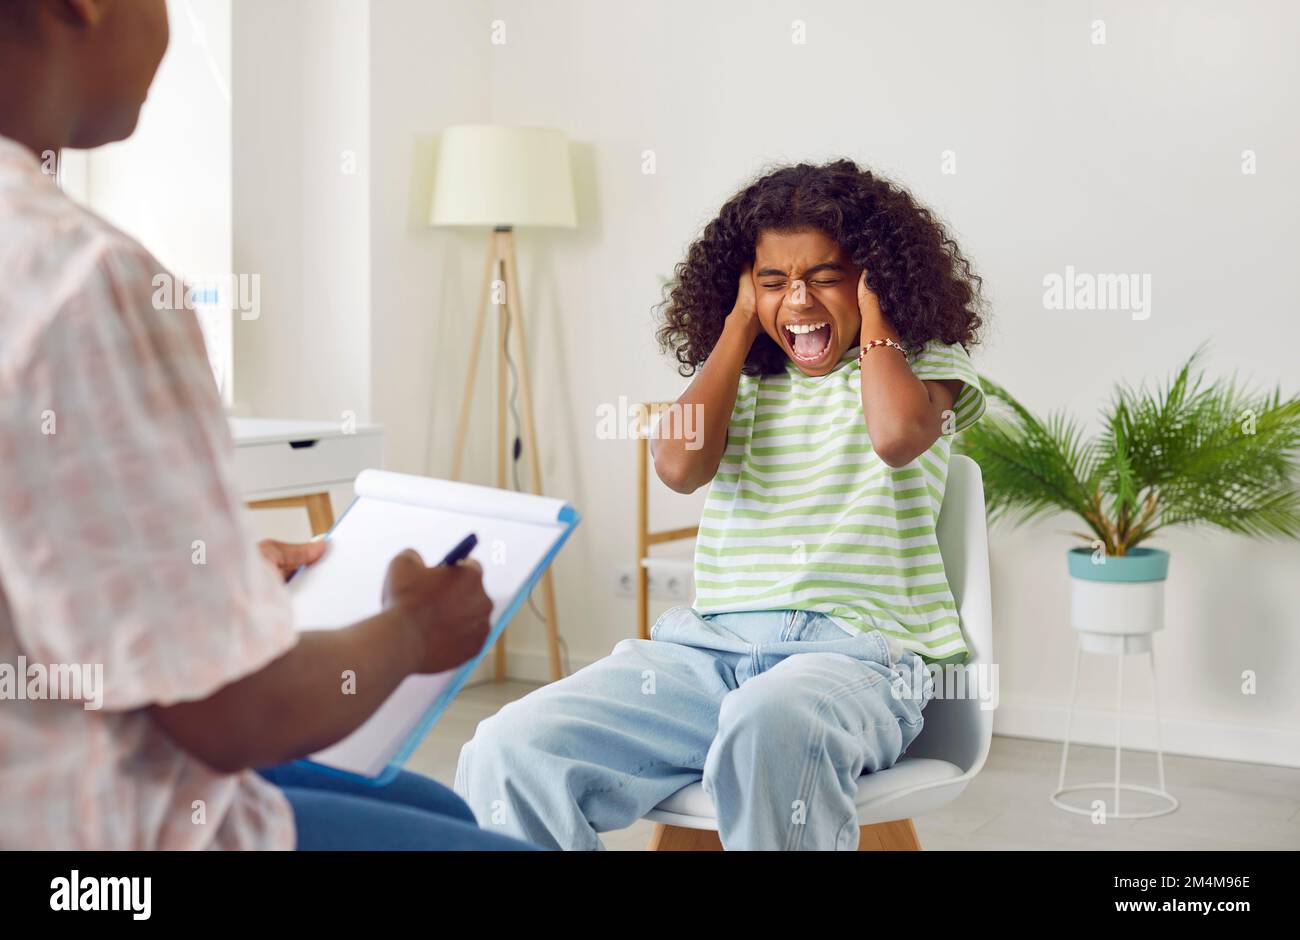 Angry teenage girl screams during session with psychologist, denying communication and treatment. Stock Photo